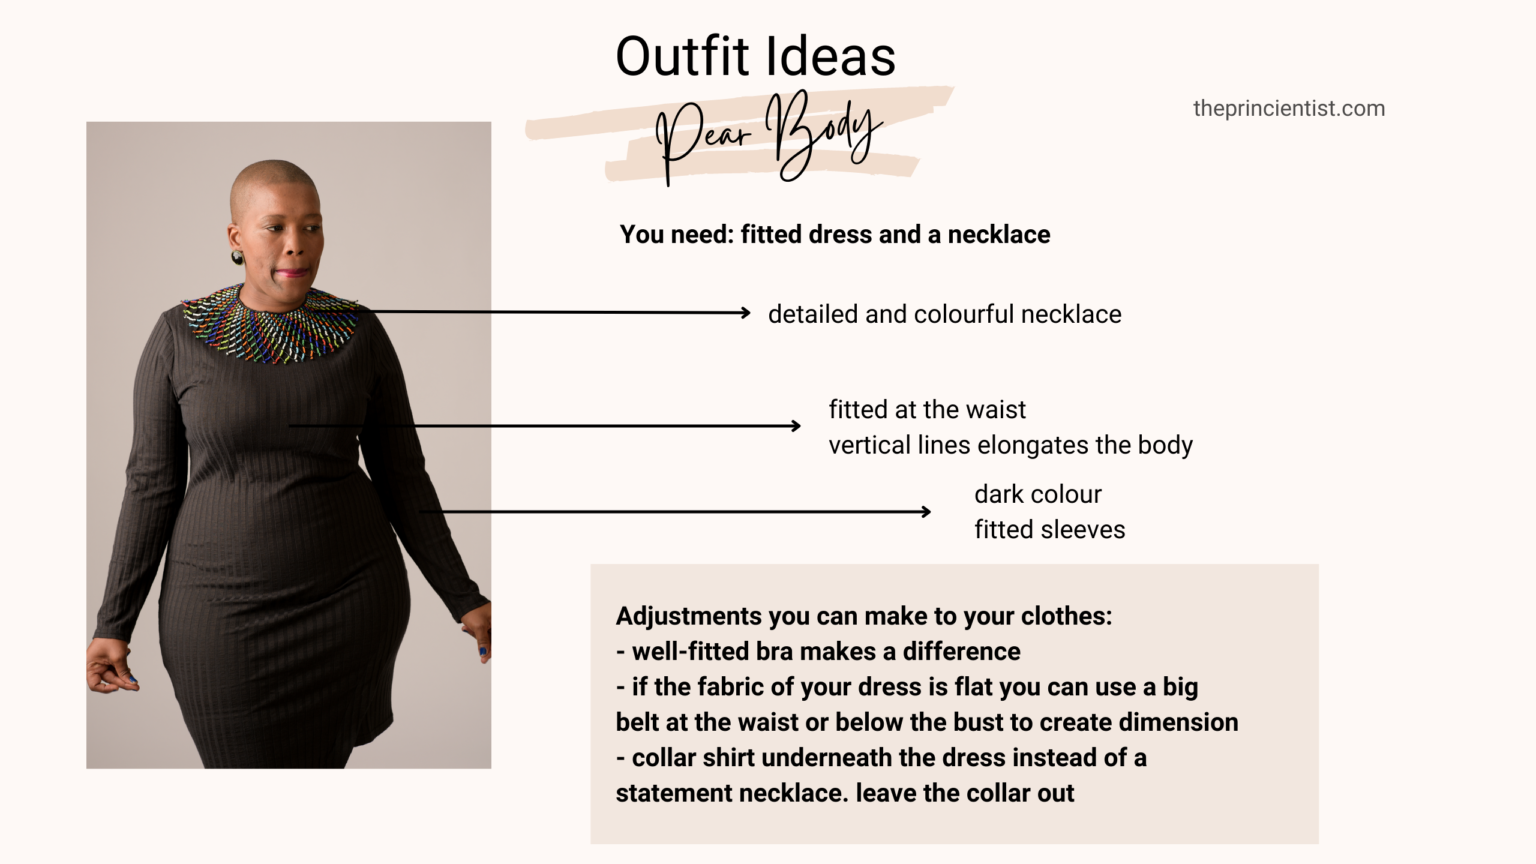 how to dress the pear shaped body - outfit ideas pear body shape 2 - fitted dress and instructions to replicate outfit at home